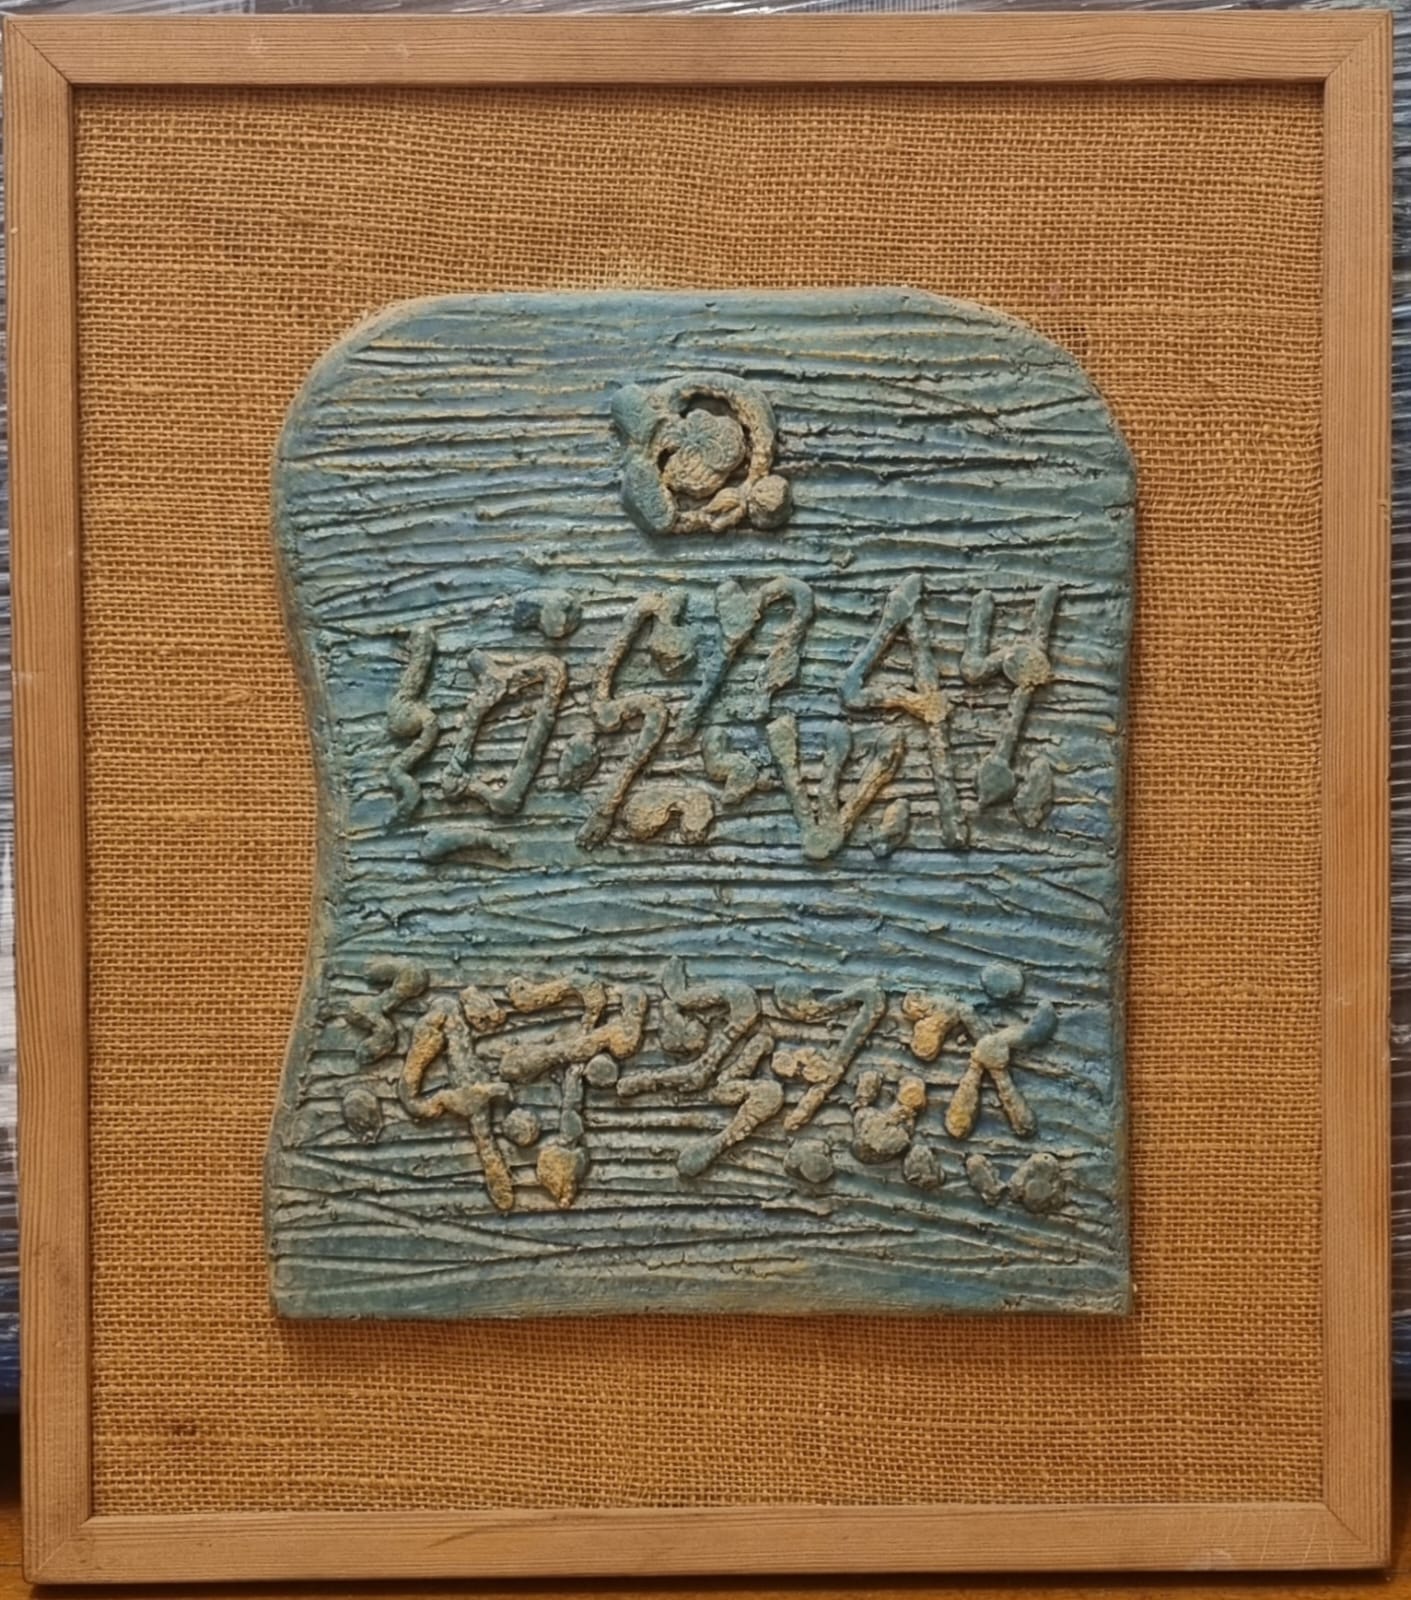 “Antique Hebrew letters” by Moshe Castel